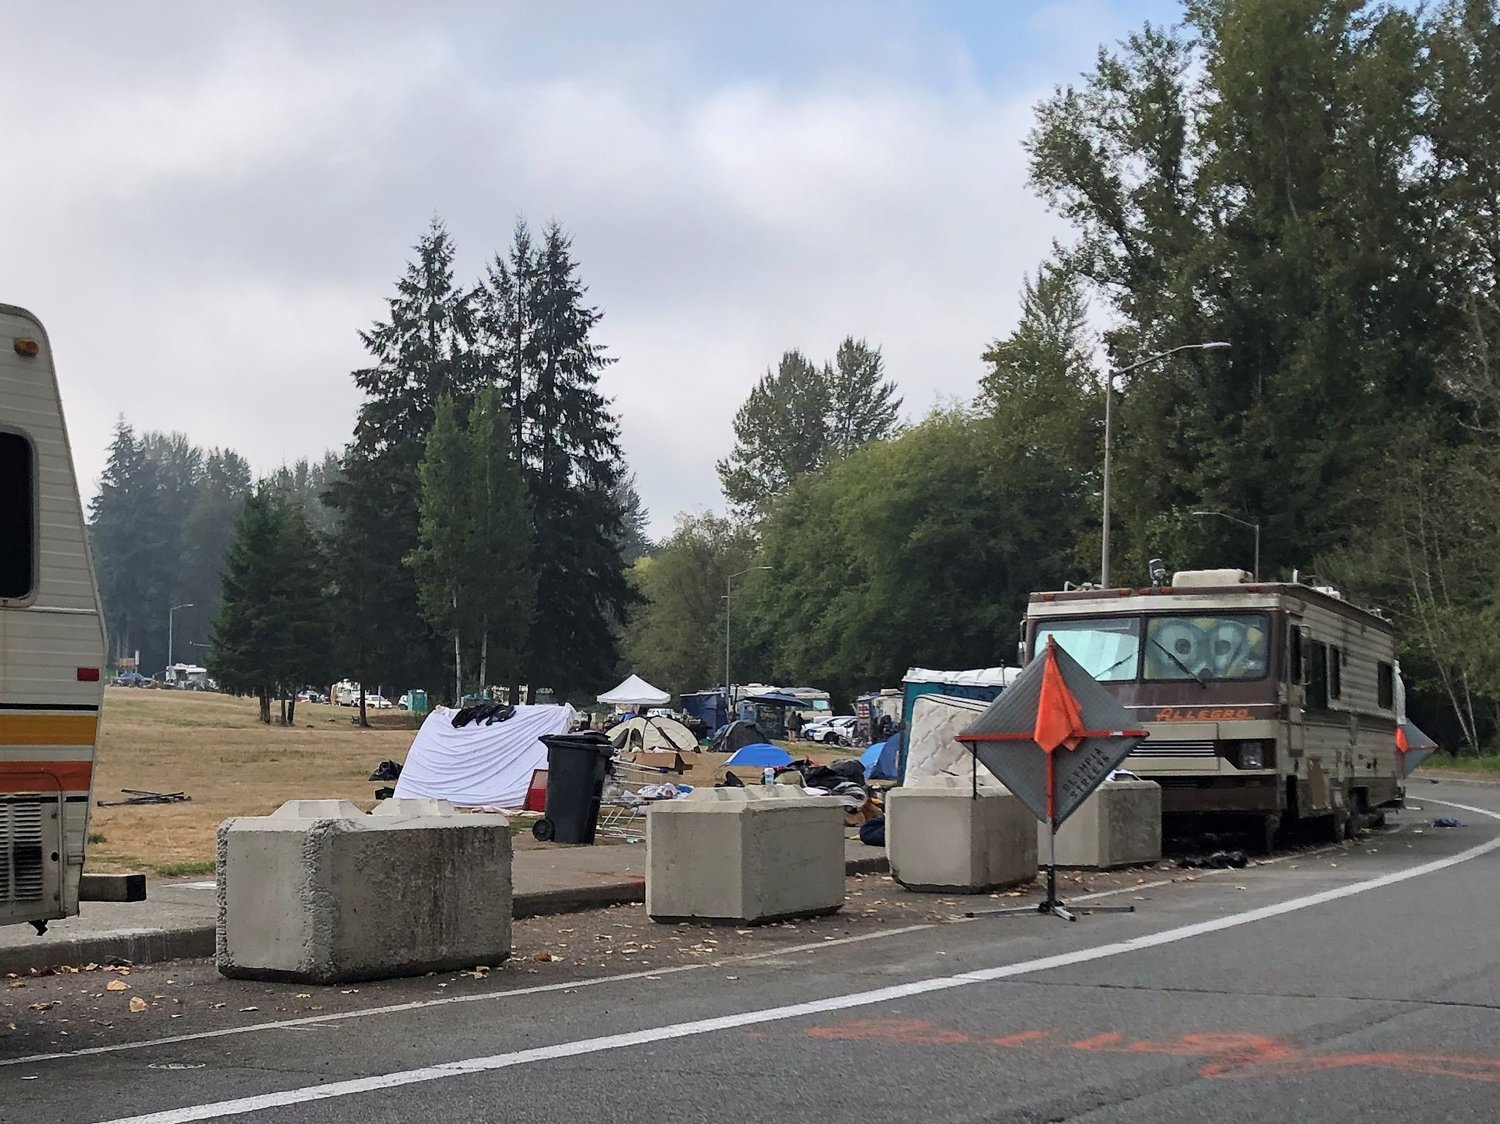 This was part of the Ensign Road Homeless Encampment on October 3, 2022, with tents and debris spread across sections of the field next to the road. Another periodic cleanup is scheduled for October 6, 2022.